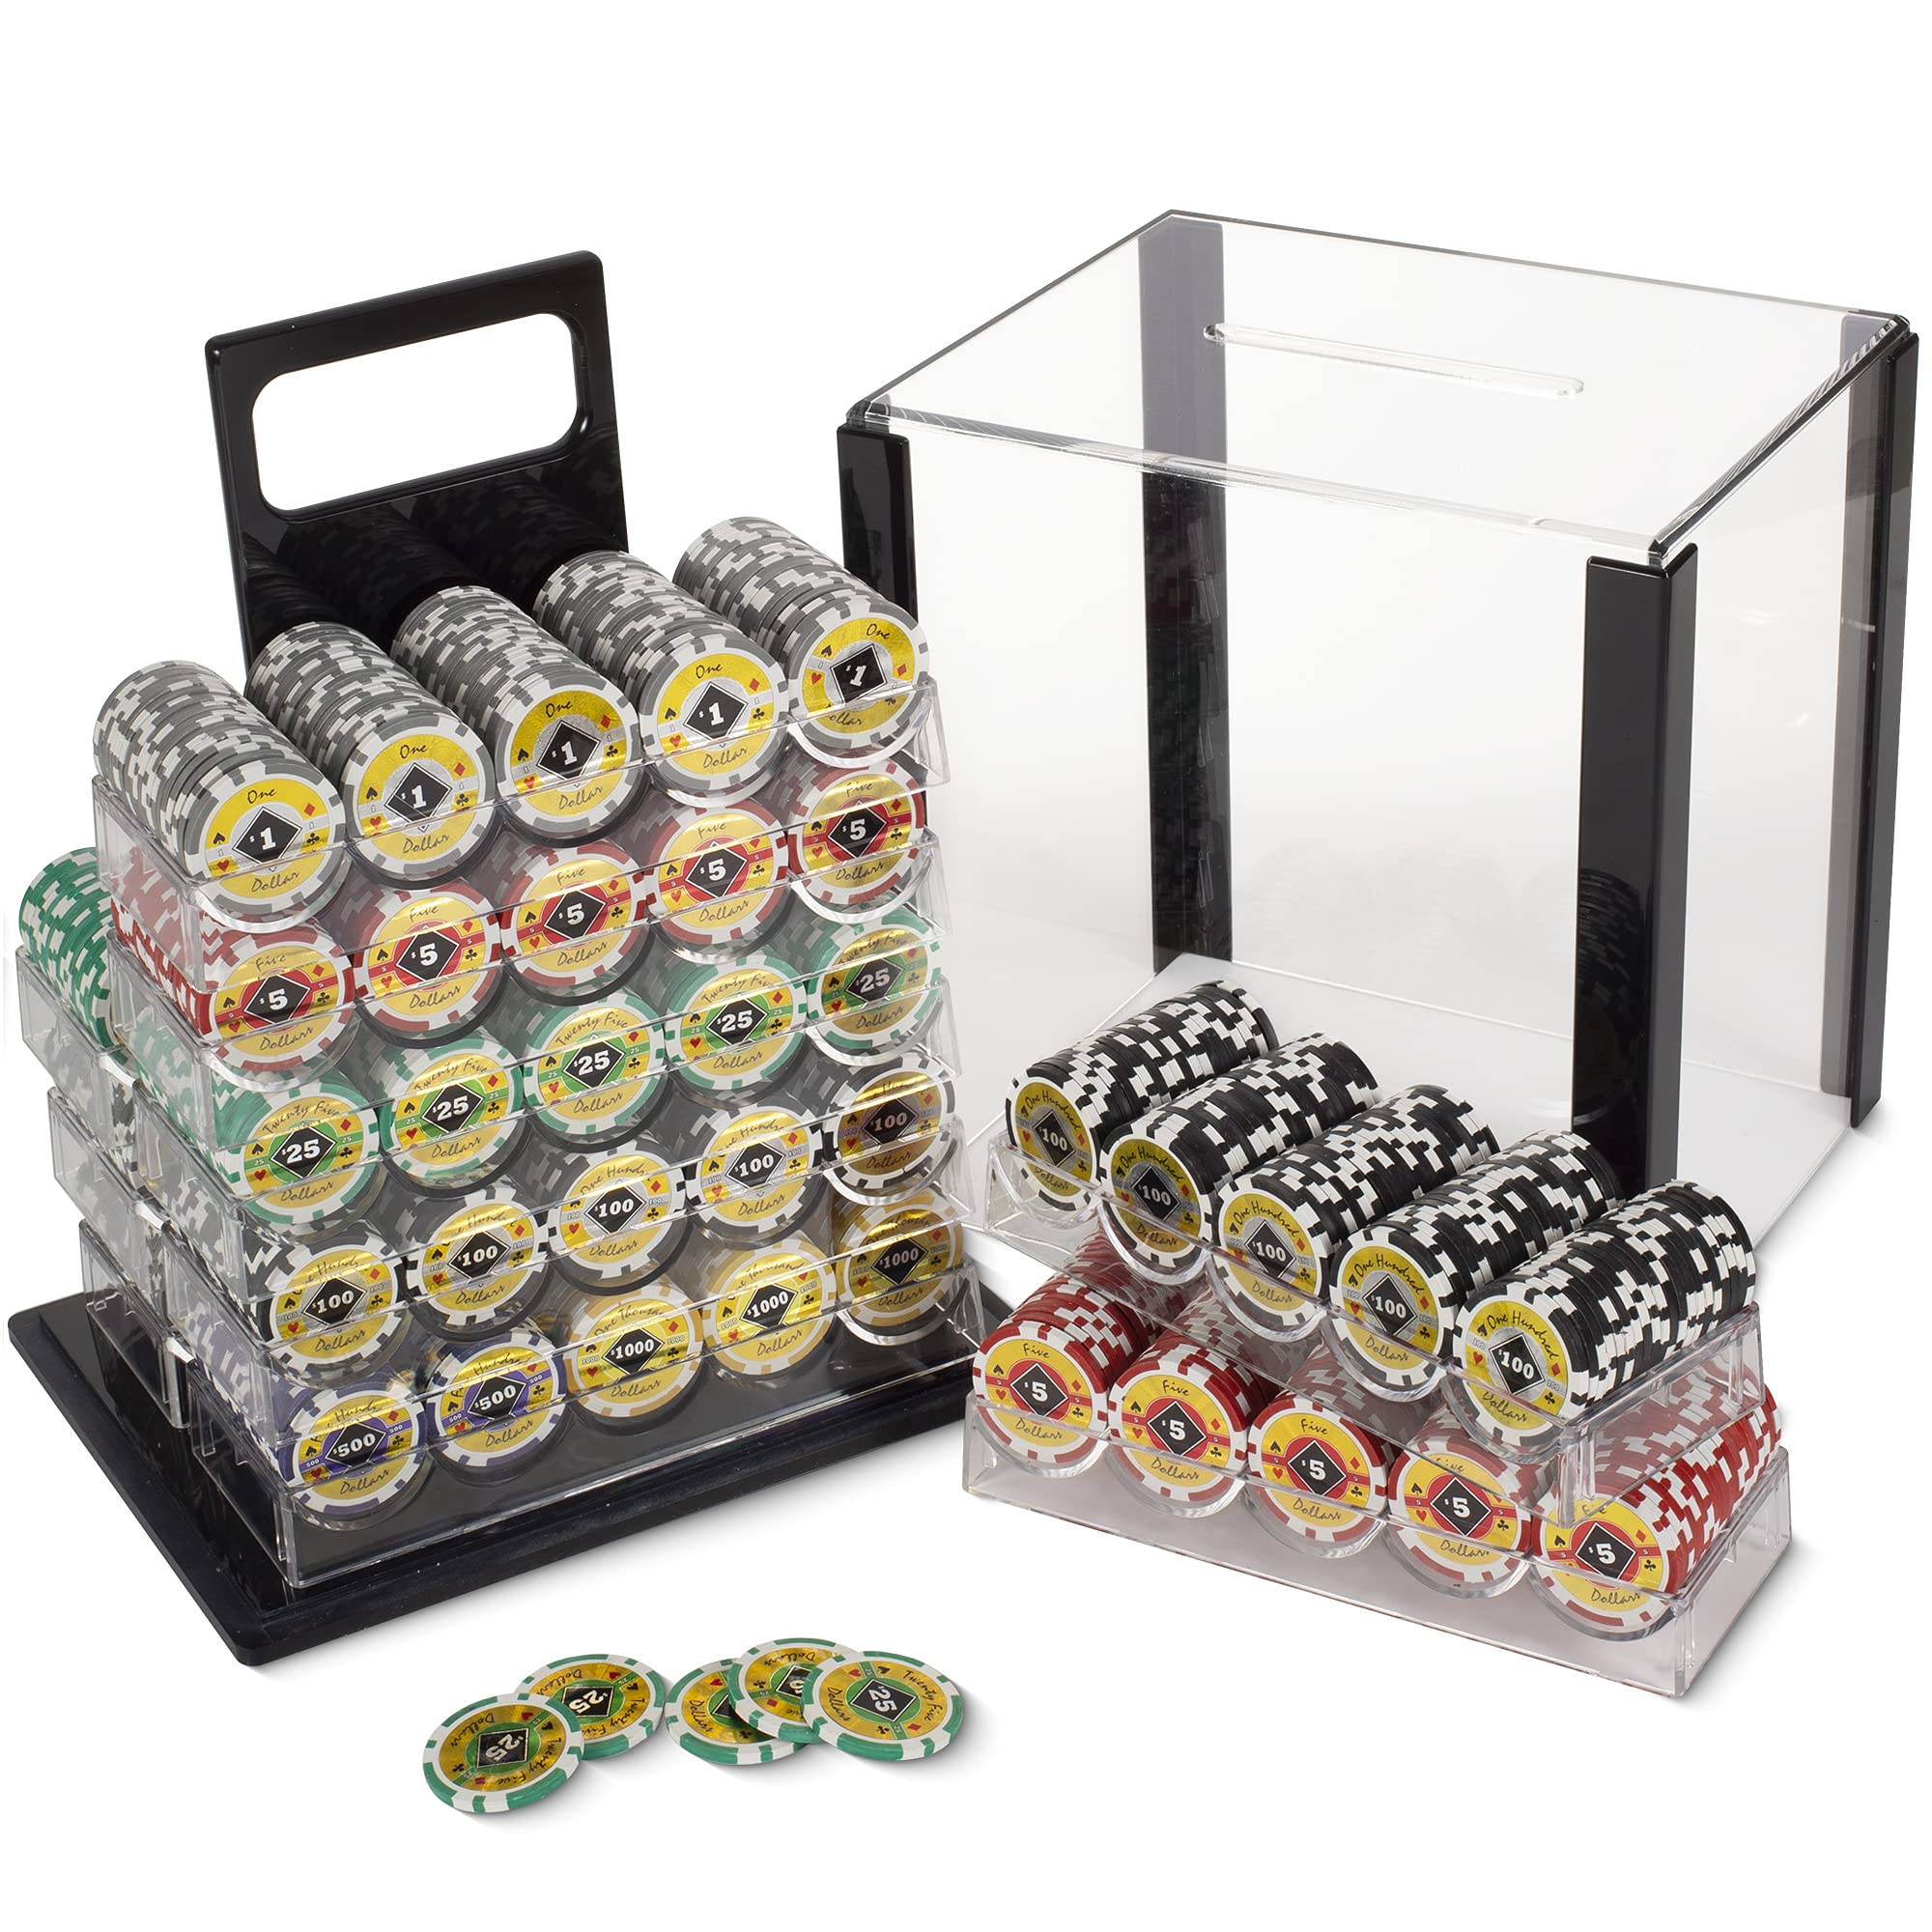 Black Diamond 14-gram Holo Inlay Poker Chip Set in Acrylic Case (1000 Count) - Clay Composite